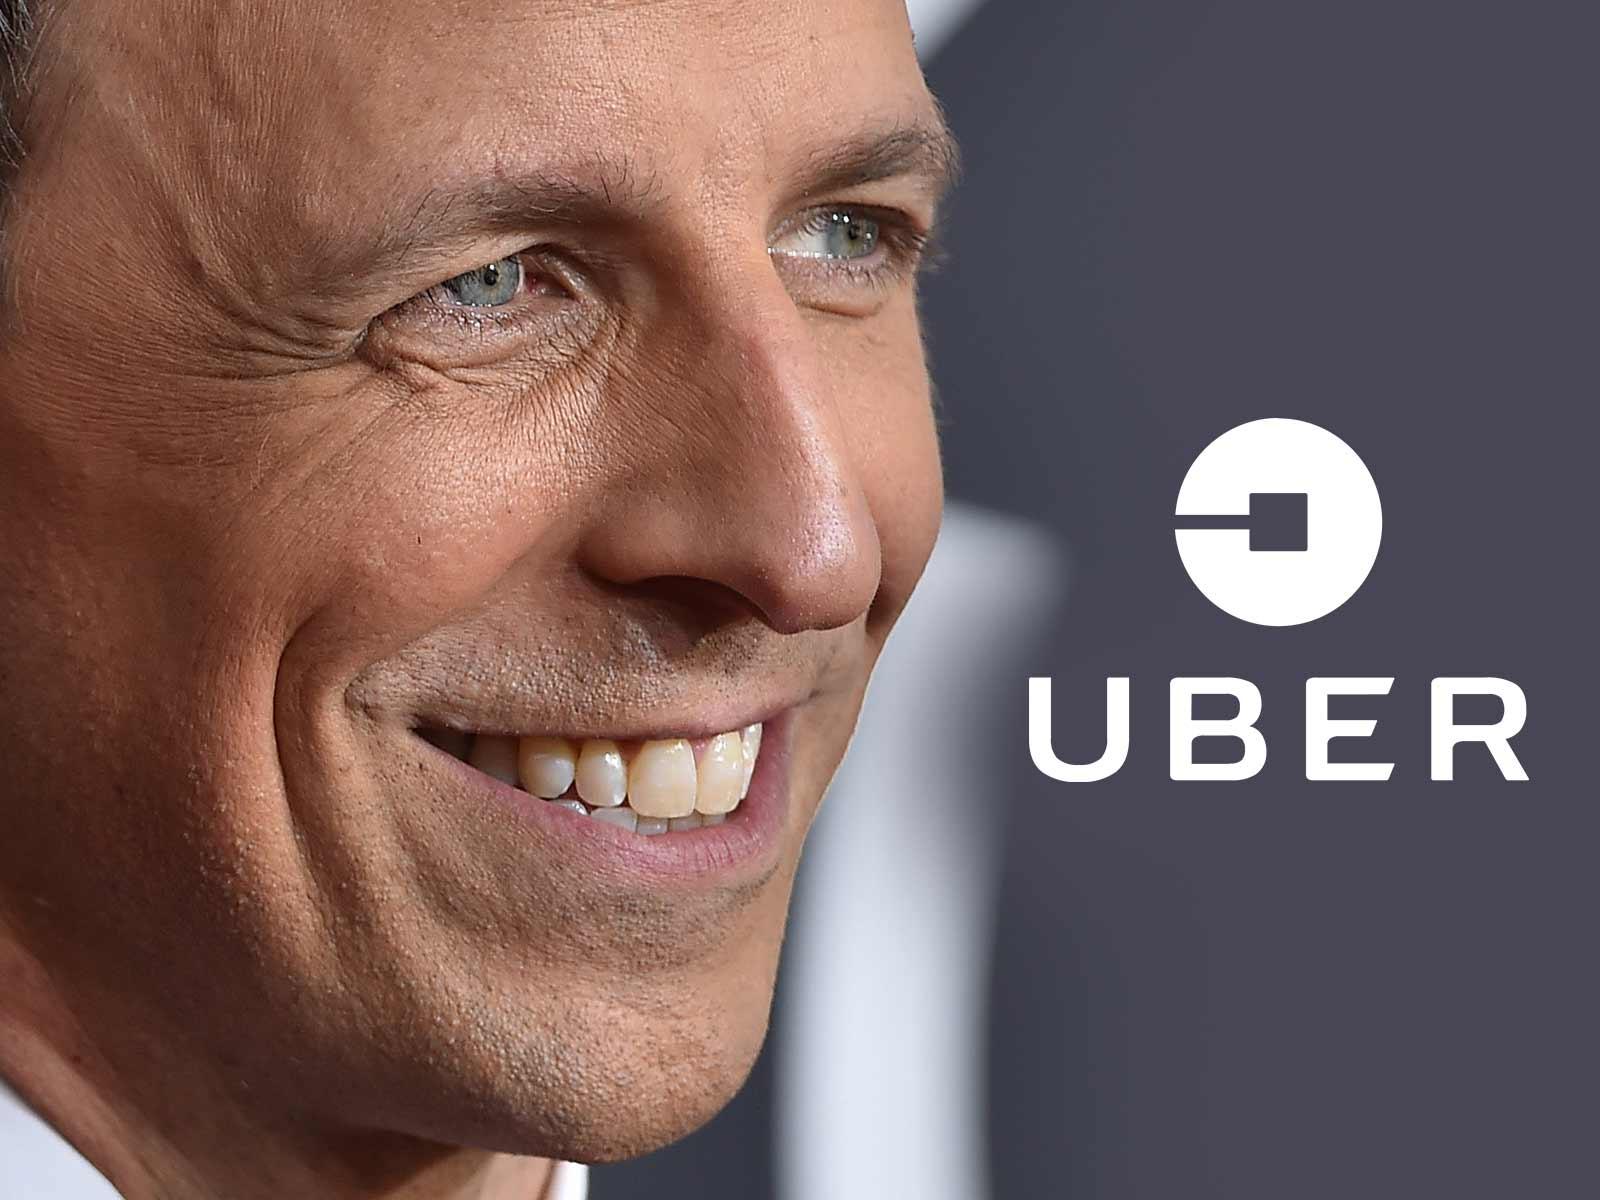 Seth Meyers Gets a Refund From Uber for Hospital Ride He Never Took